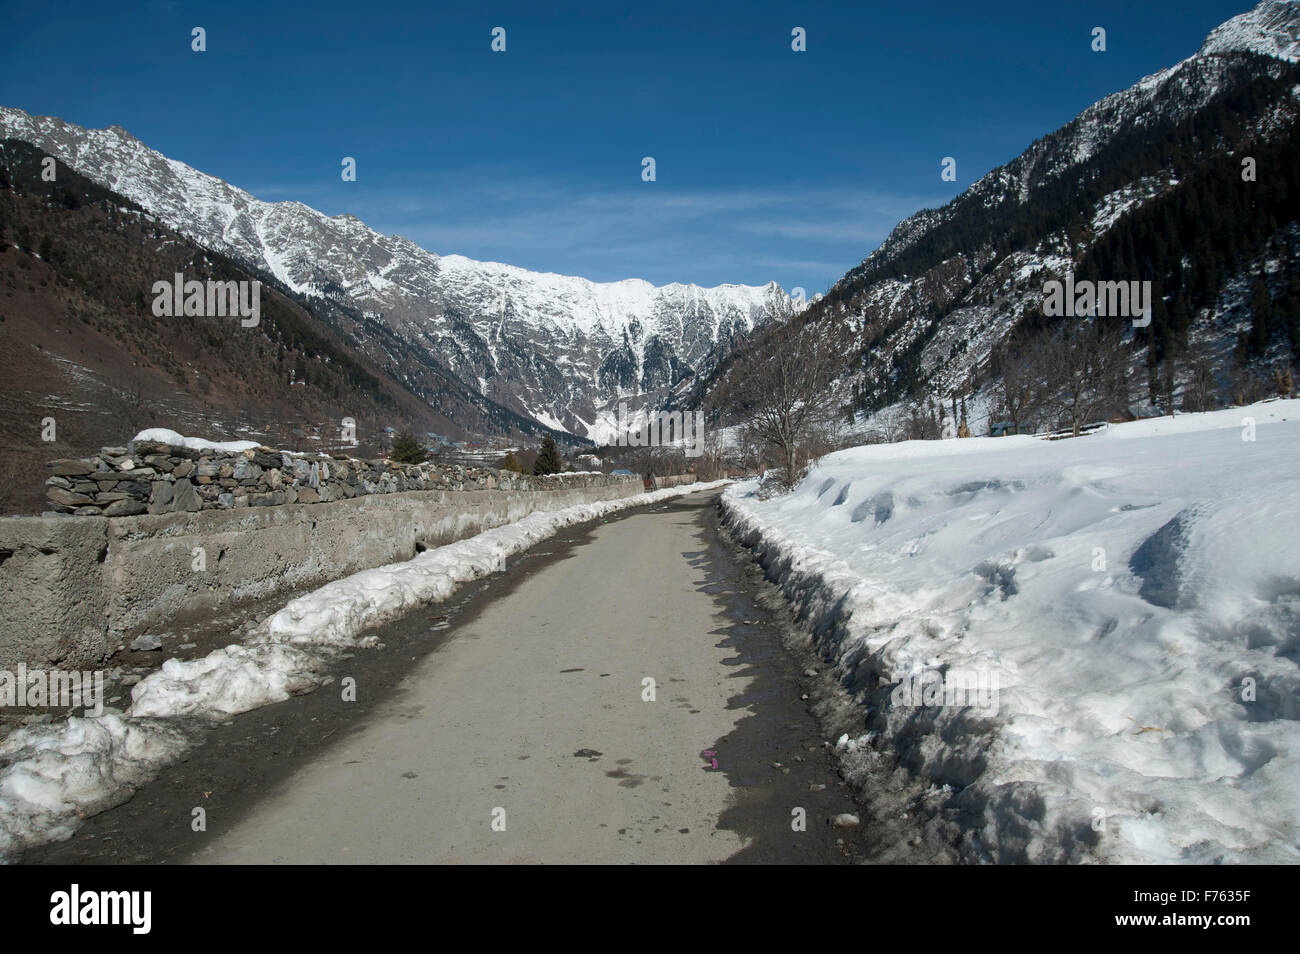 View of snow clad mountains with snow on either side of road Sonmarg Kashmir India Asia Stock Photo